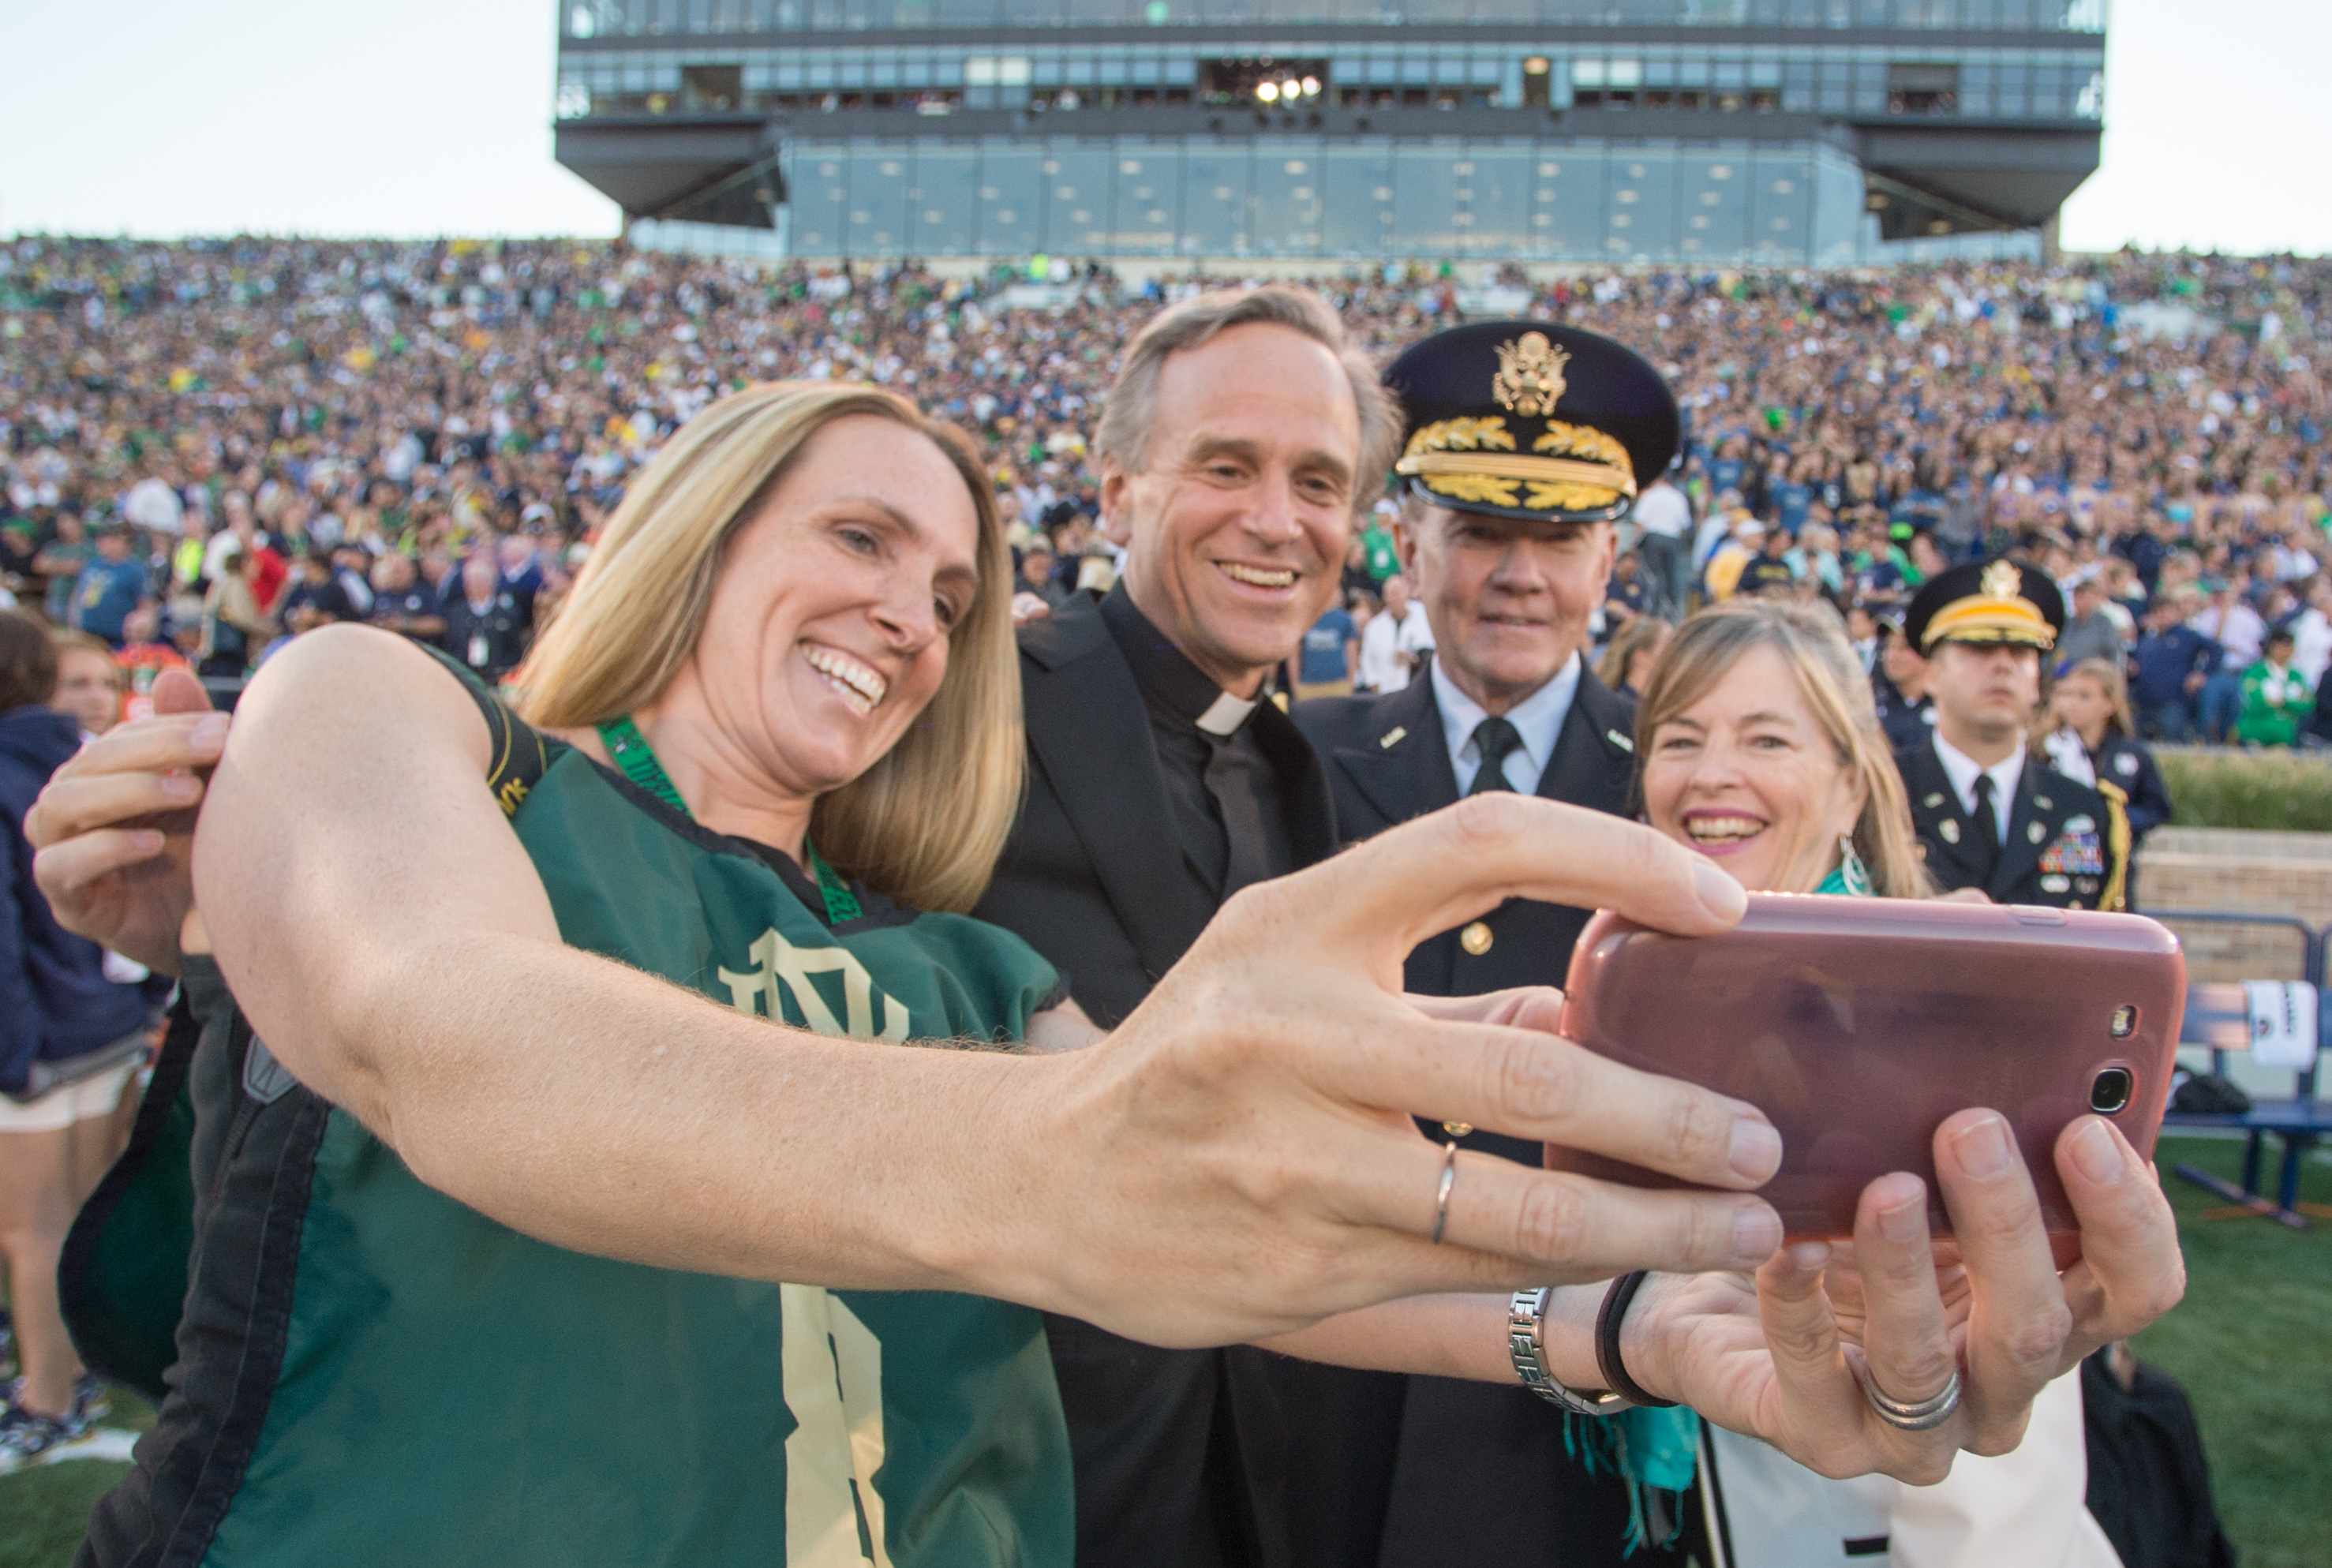 Chairman of the Joint Chiefs of Staff Gen. Martin E. Dempsey, his wife Deanie, Rev. John I. Jenkins, C.S.C., president of Notre Dame University, and a military spouse take a selfie on the field before a football game at Notre Dame Stadium in South Bend, Ind., Sept. 6, 2014. DoD Photo by Mass Communication Specialist 1st Class Daniel Hinton.